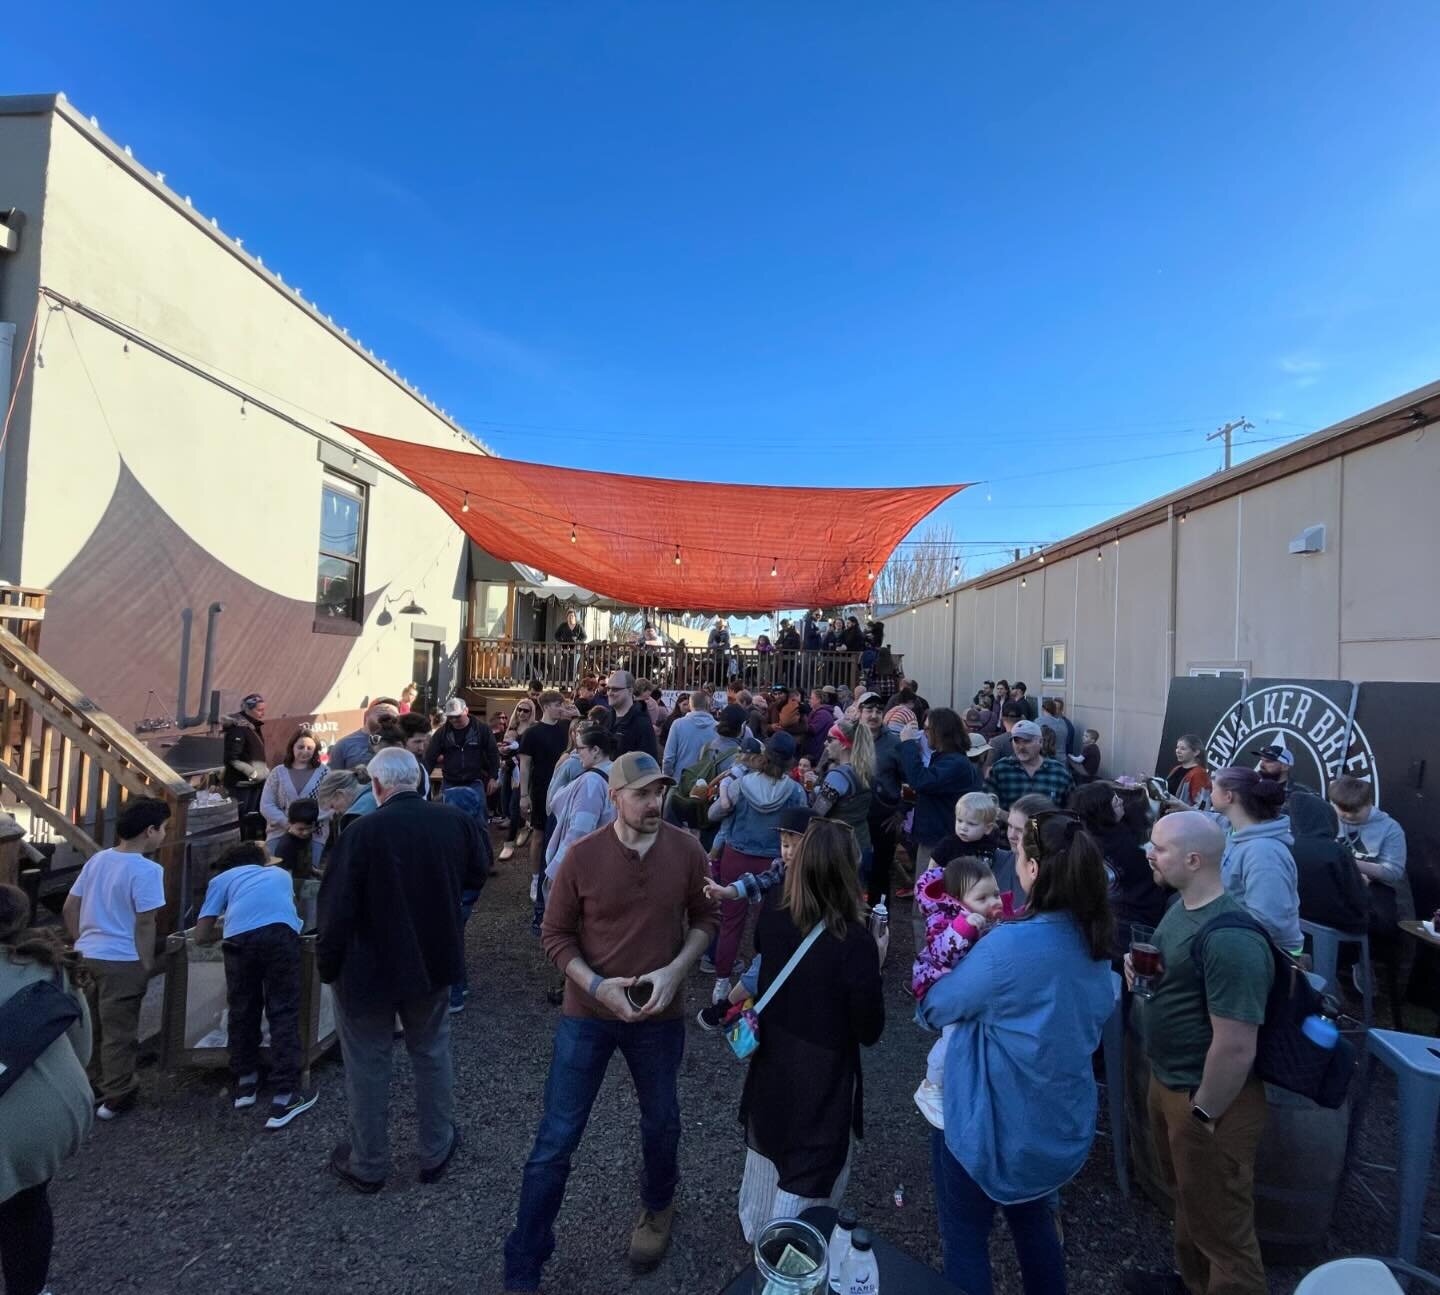 What an incredible turnout we had for baby goats! 
.
If you didn&rsquo;t make it, don&rsquo;t stress, baby goats return April 11th! We will plan to extend our outdoor space even further after seeing that turnout!
.
Shoutout to @carpentercreekranch fo